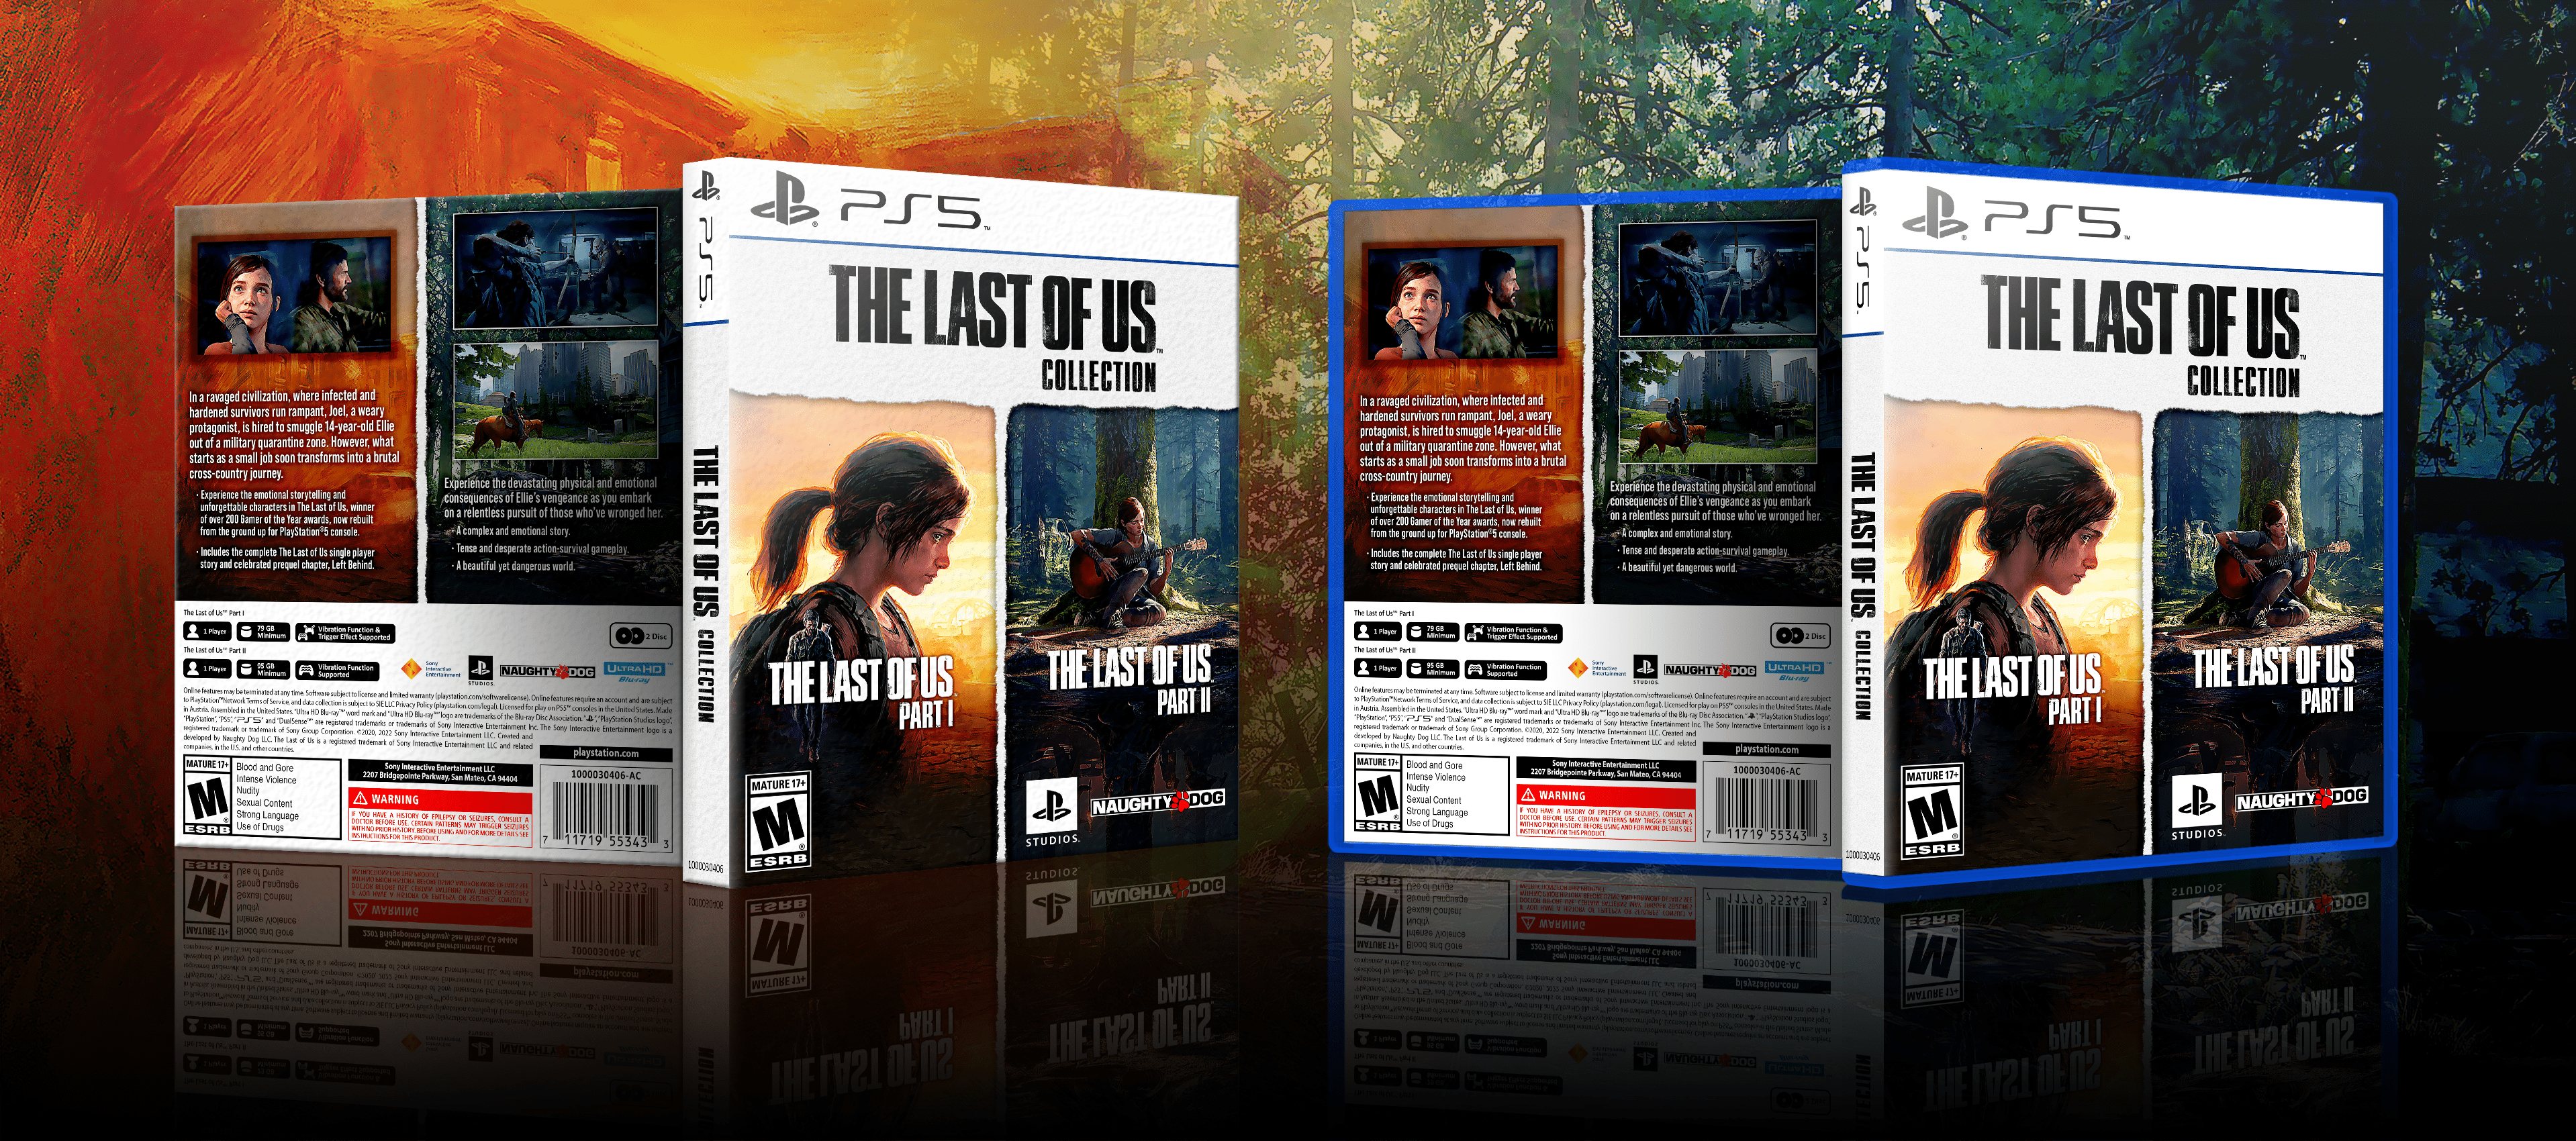 The Last of Us Collection box cover